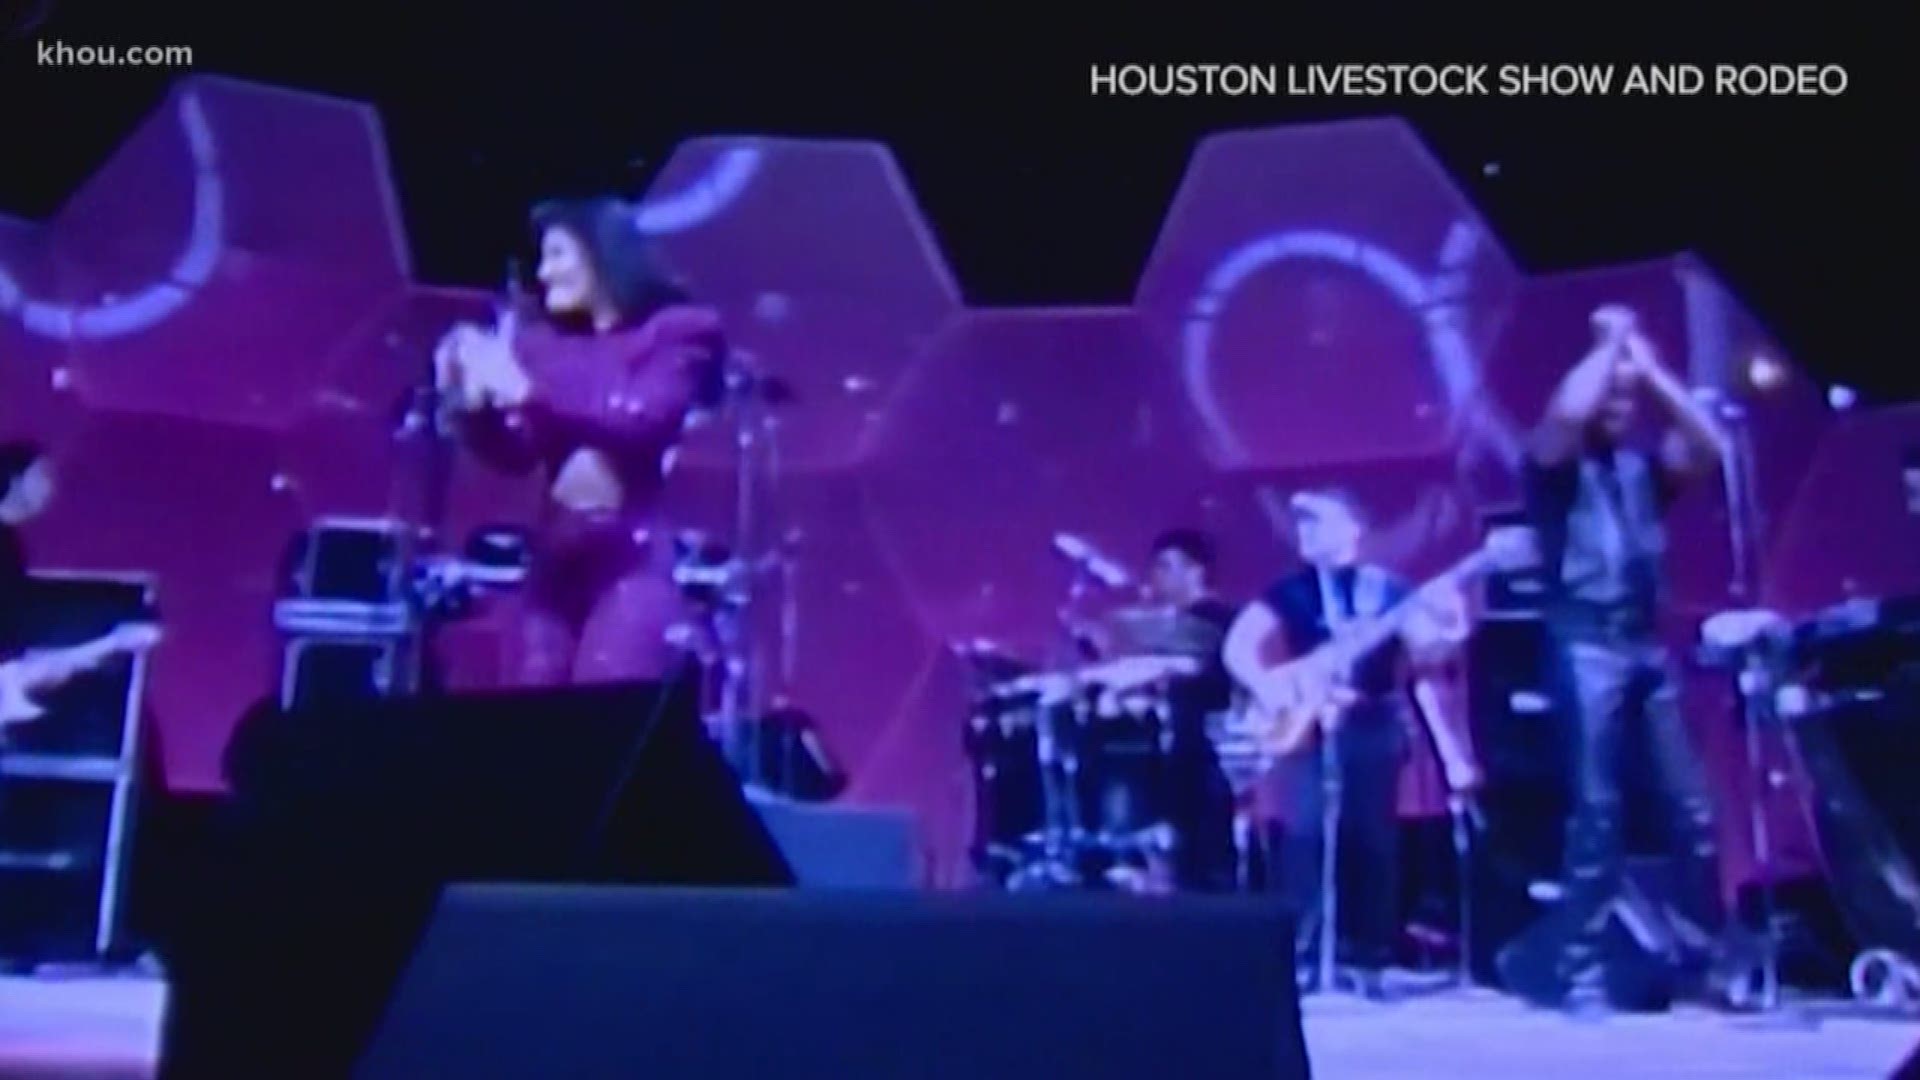 The Queen of Tejano Music is still being celebrated at the Houston Livestock Show and Rodeo 25 years after her death.